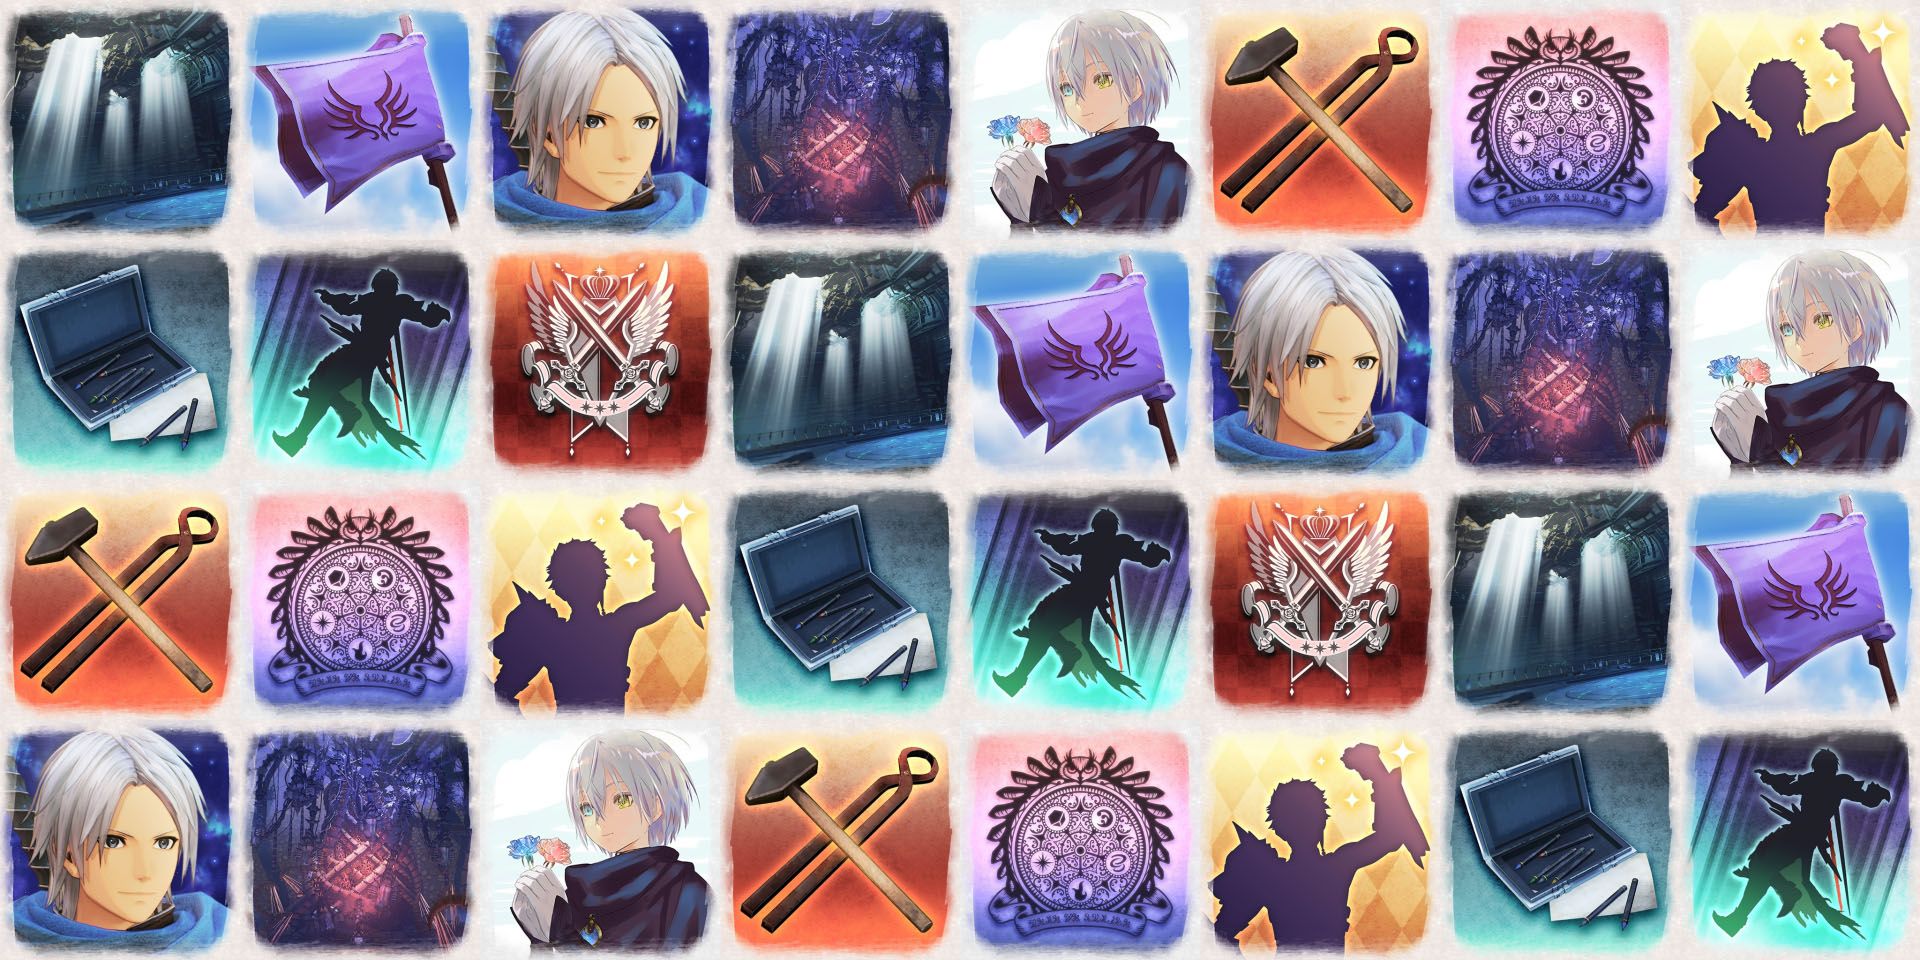 tales-of-arise-beyond-the-dawn-trophies